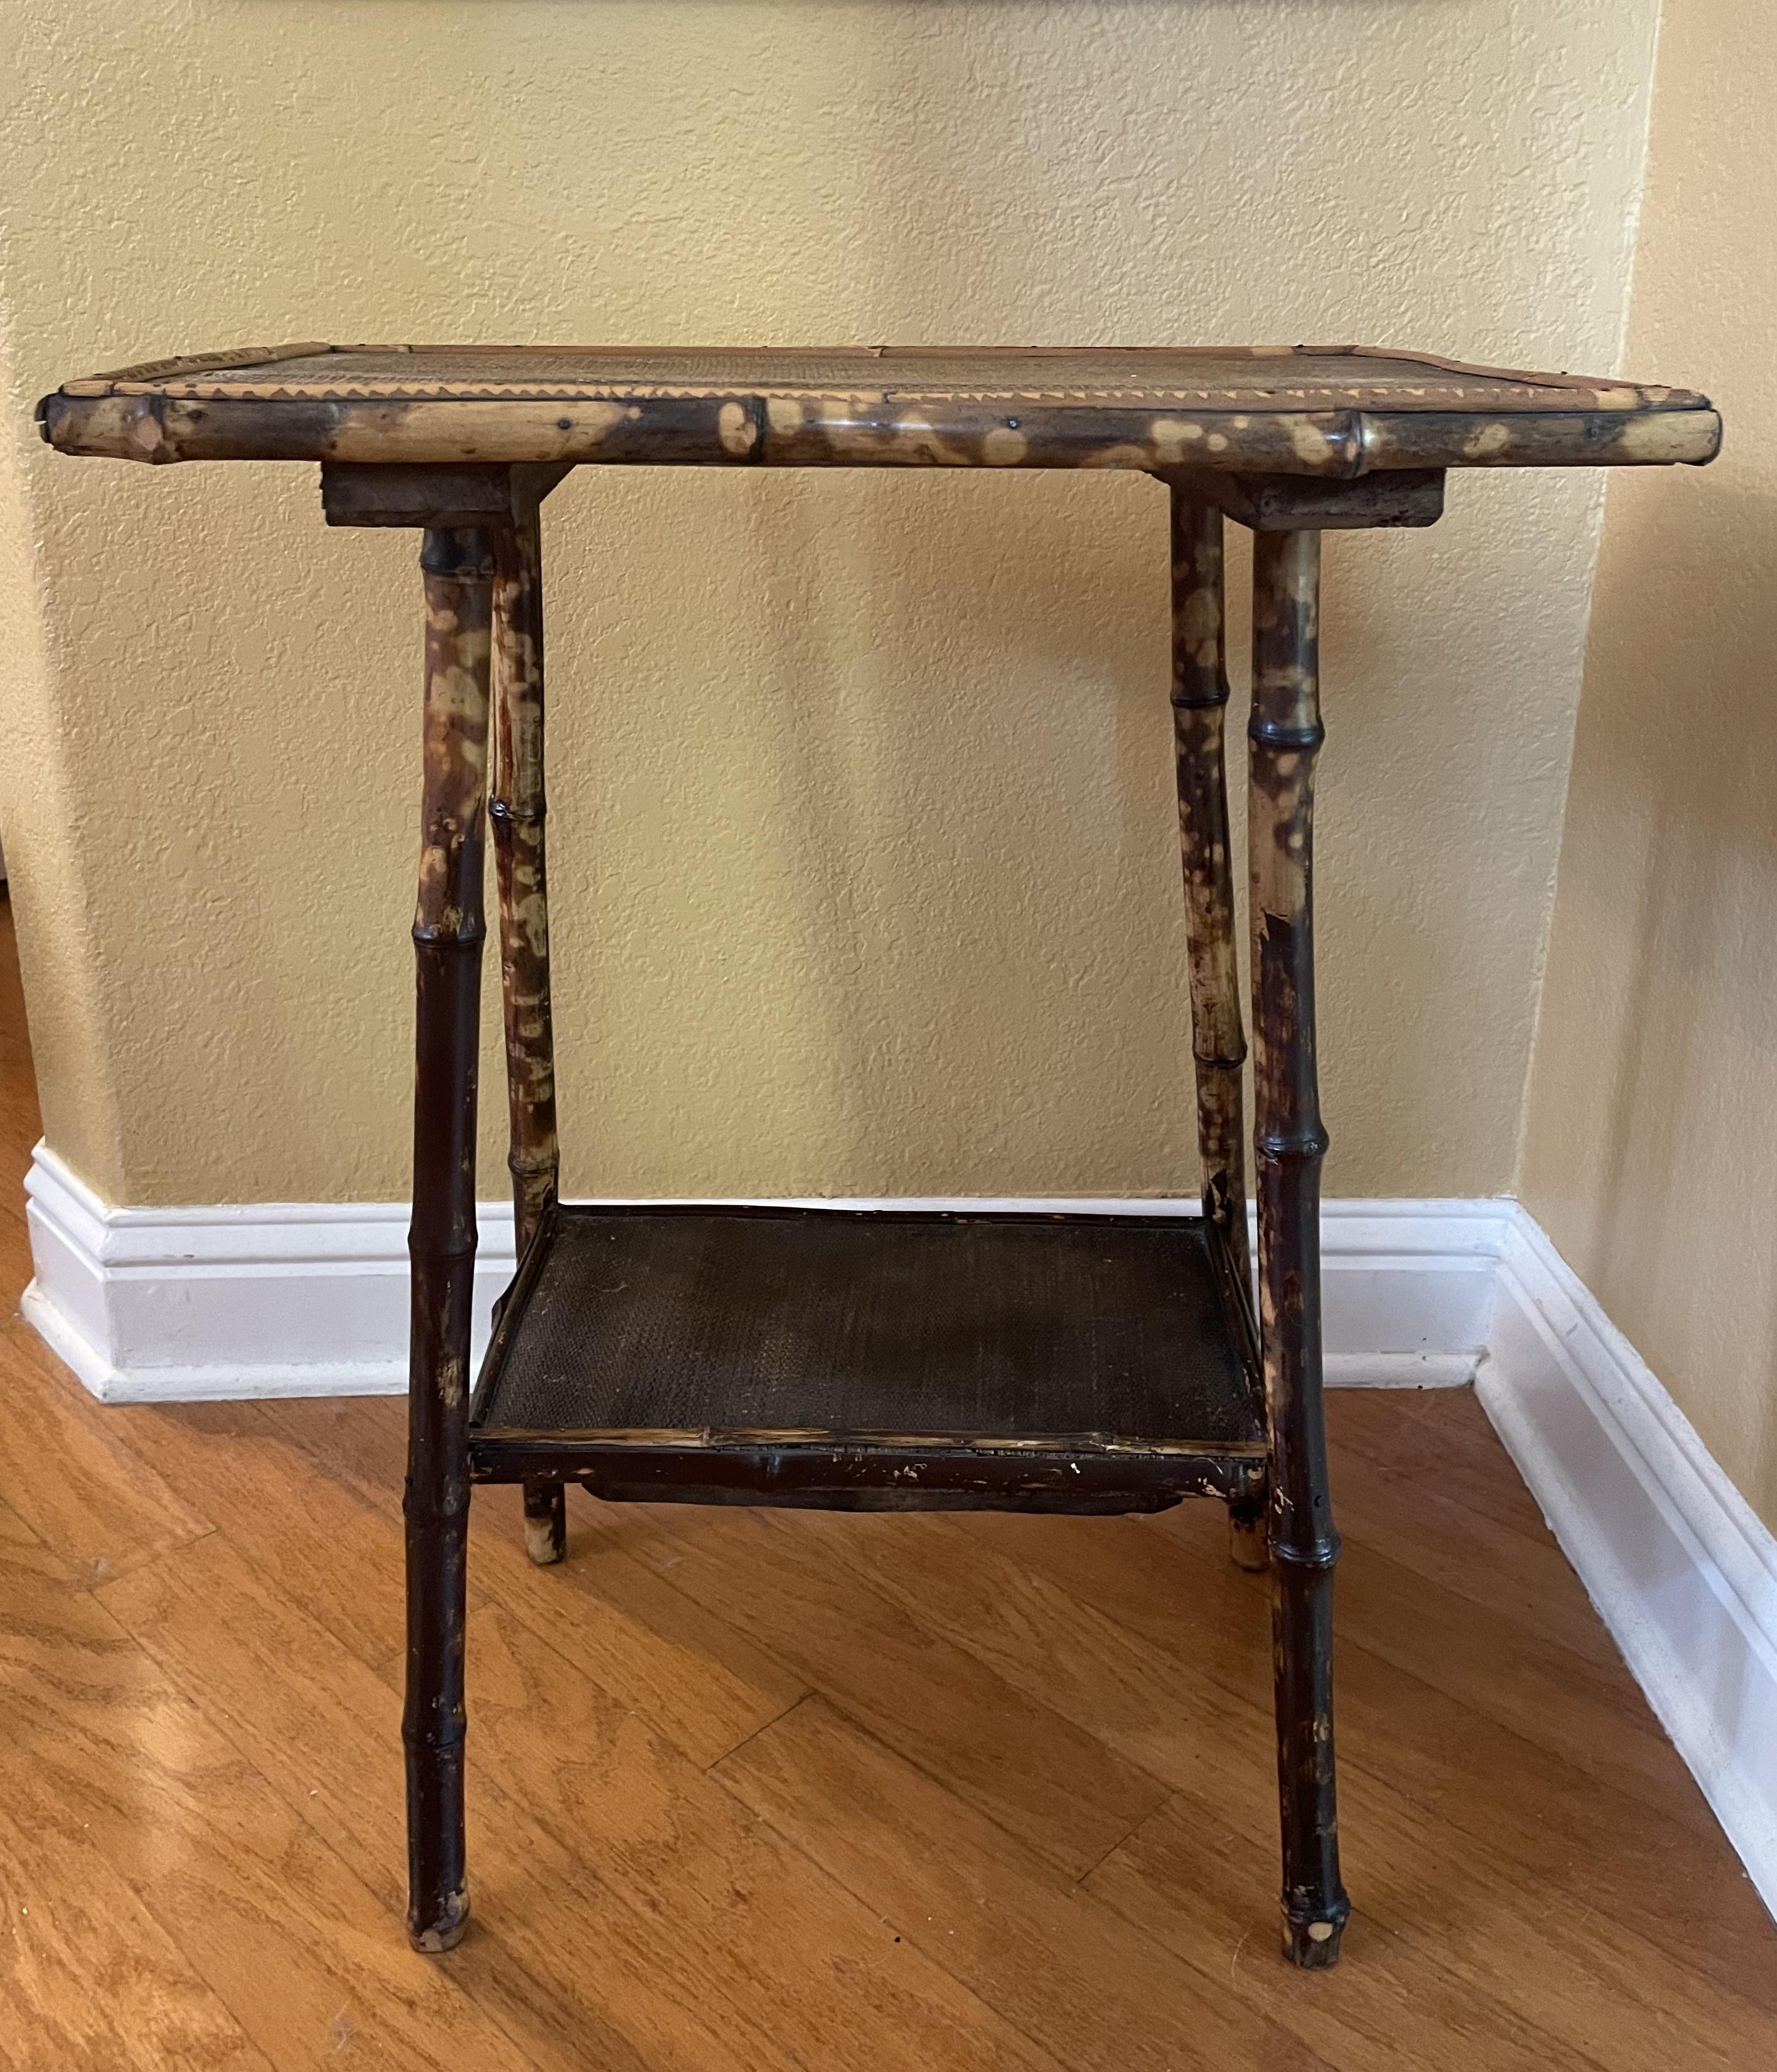 An antique 'all-over' tortoise pattern bamboo side table from South Asia. A distinctive and soulful piece that is well crafted. The 'tortoised bamboo' in furniture is sought after, yet harder to find. It's more common to find plain brown bamboo,